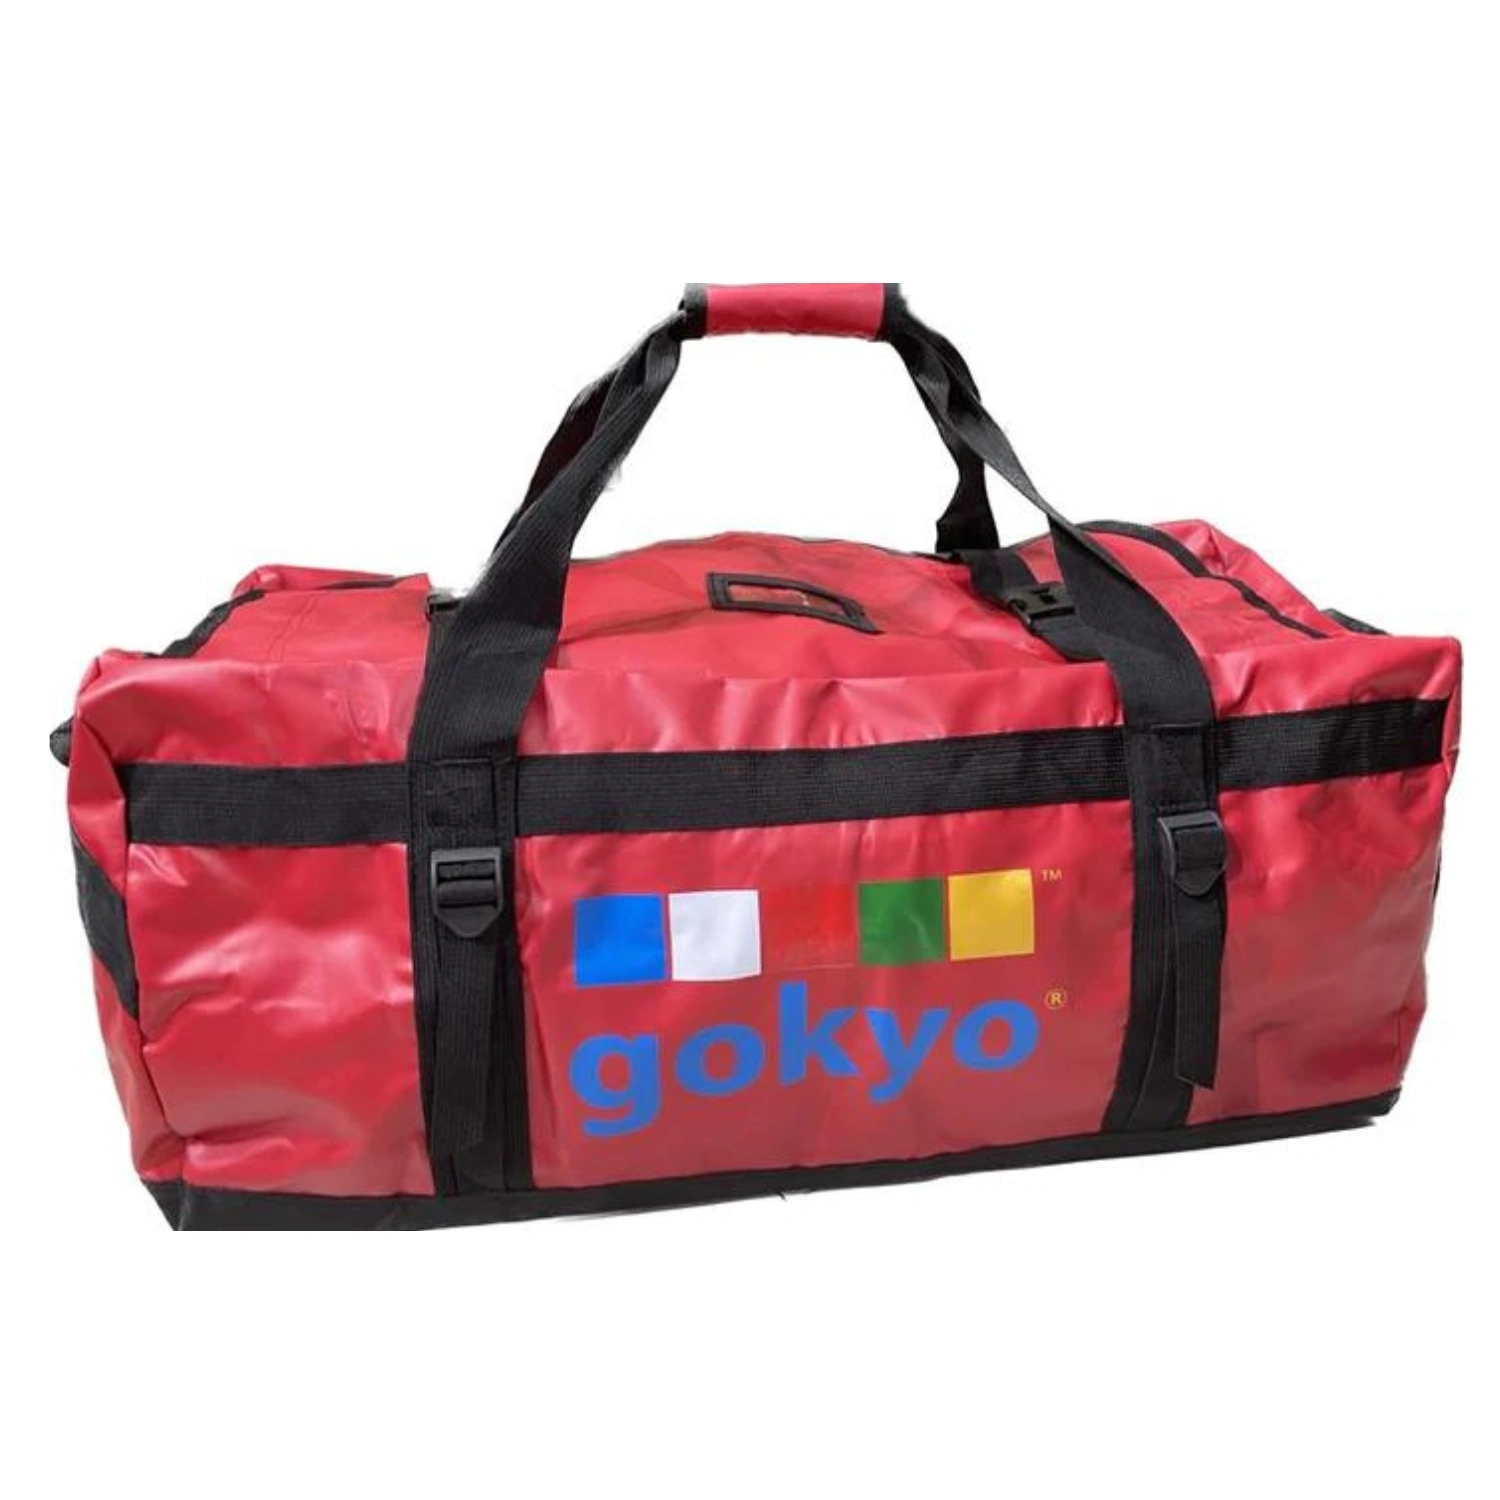 K2 Duffle Bag for Treks &amp; Expeditions: Waterproof and Durable Duffel Bag with Comfortable Straps for Extended Trips-230161